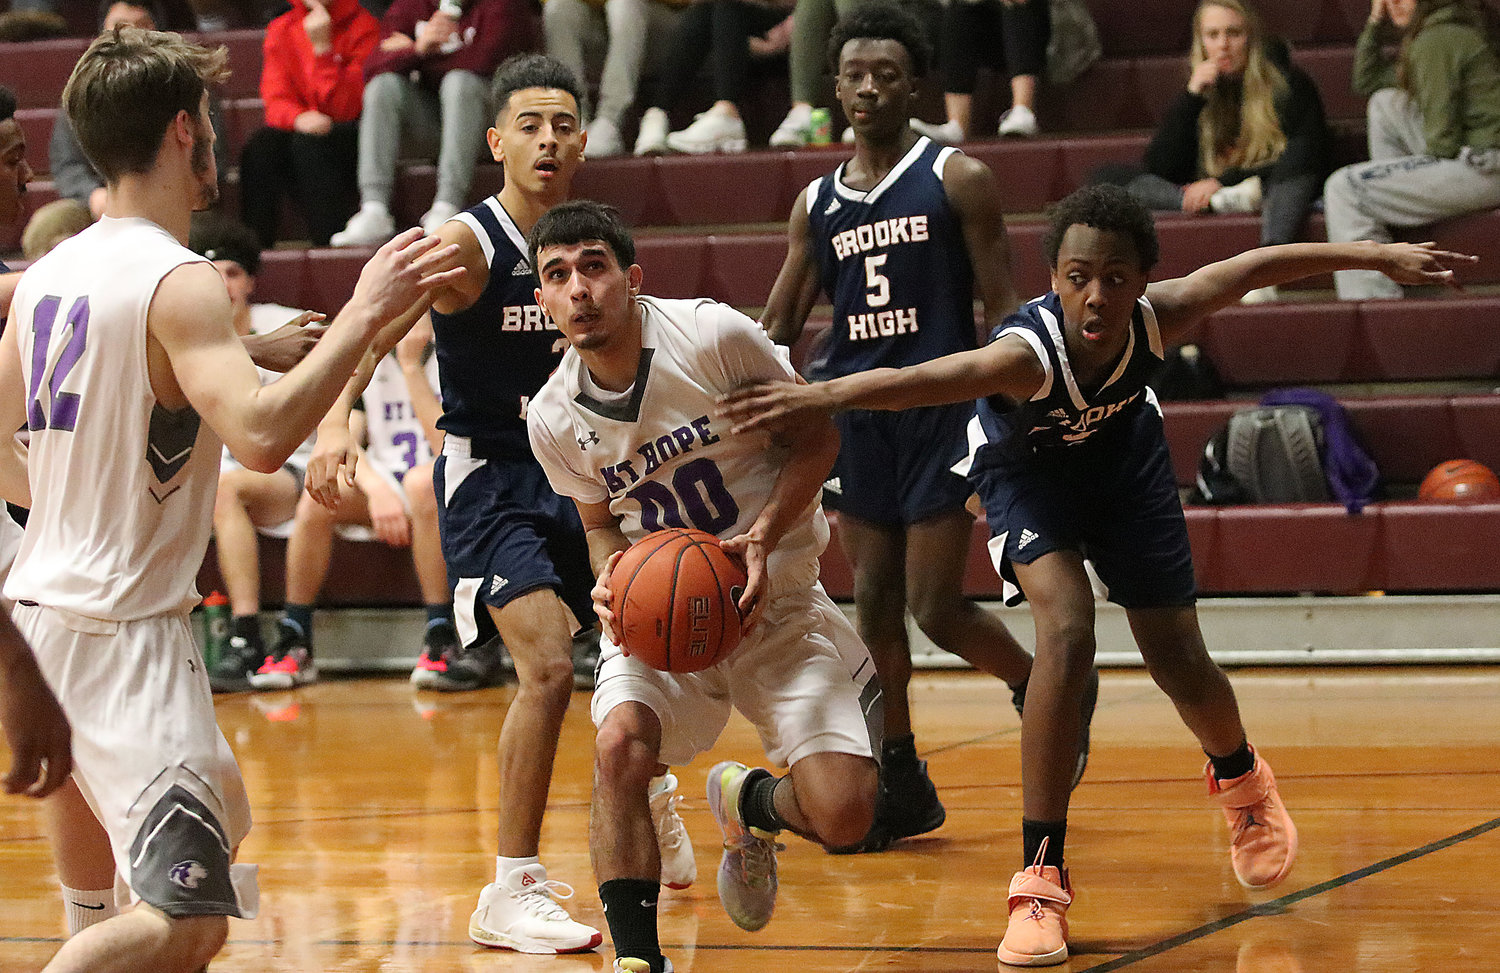 Point guard Xavier Costa looks to drive to the basket with Brooke High players in tow.